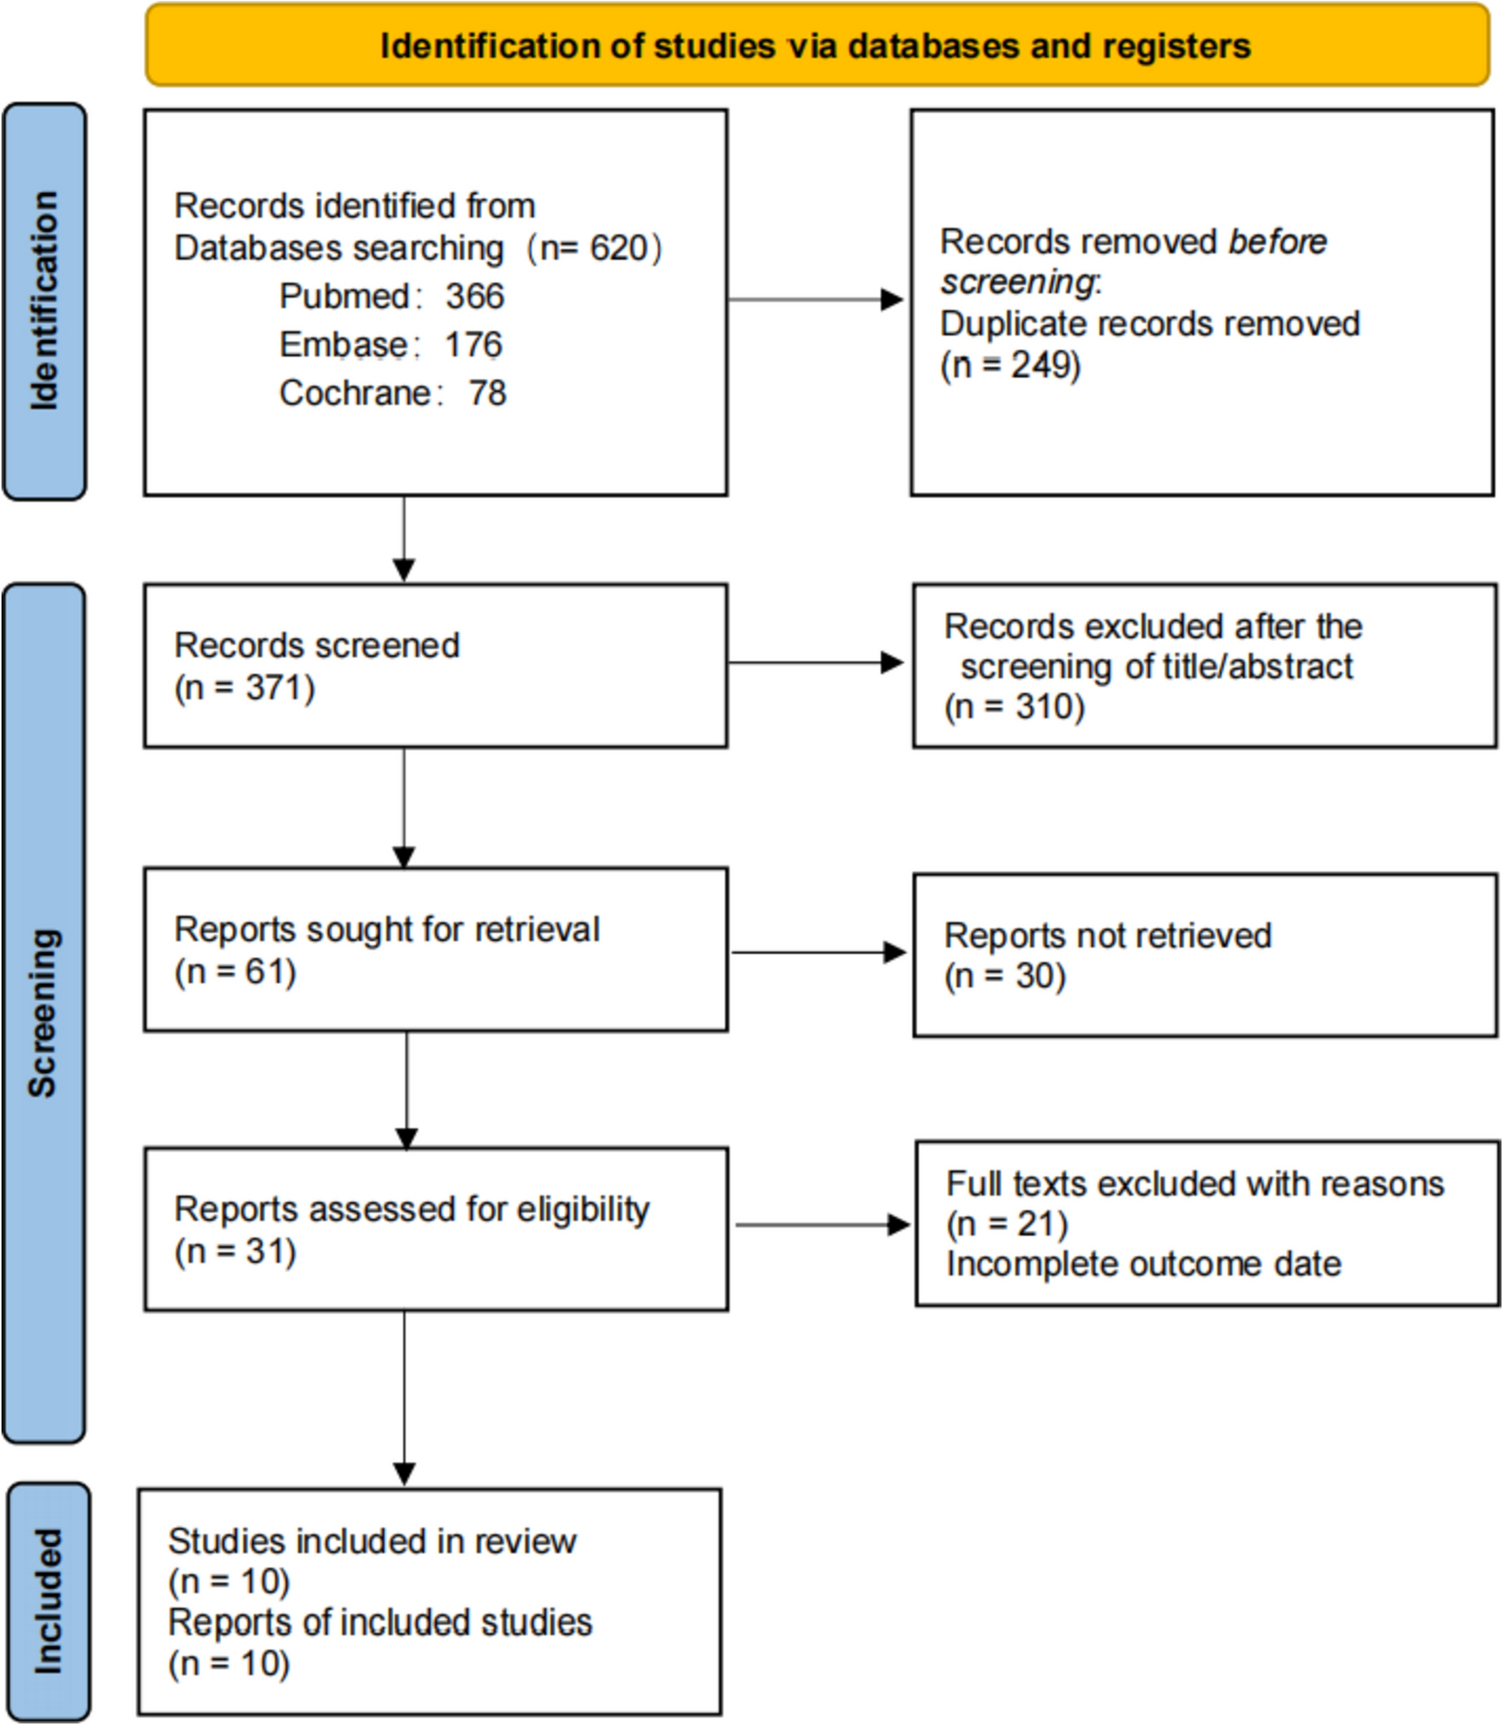 Elastic Stable Intramedullary Nailing Versus Plate Internal Fixation for Pediatric Diaphyseal Femur Fractures: A Systematic Review and Meta-analysis